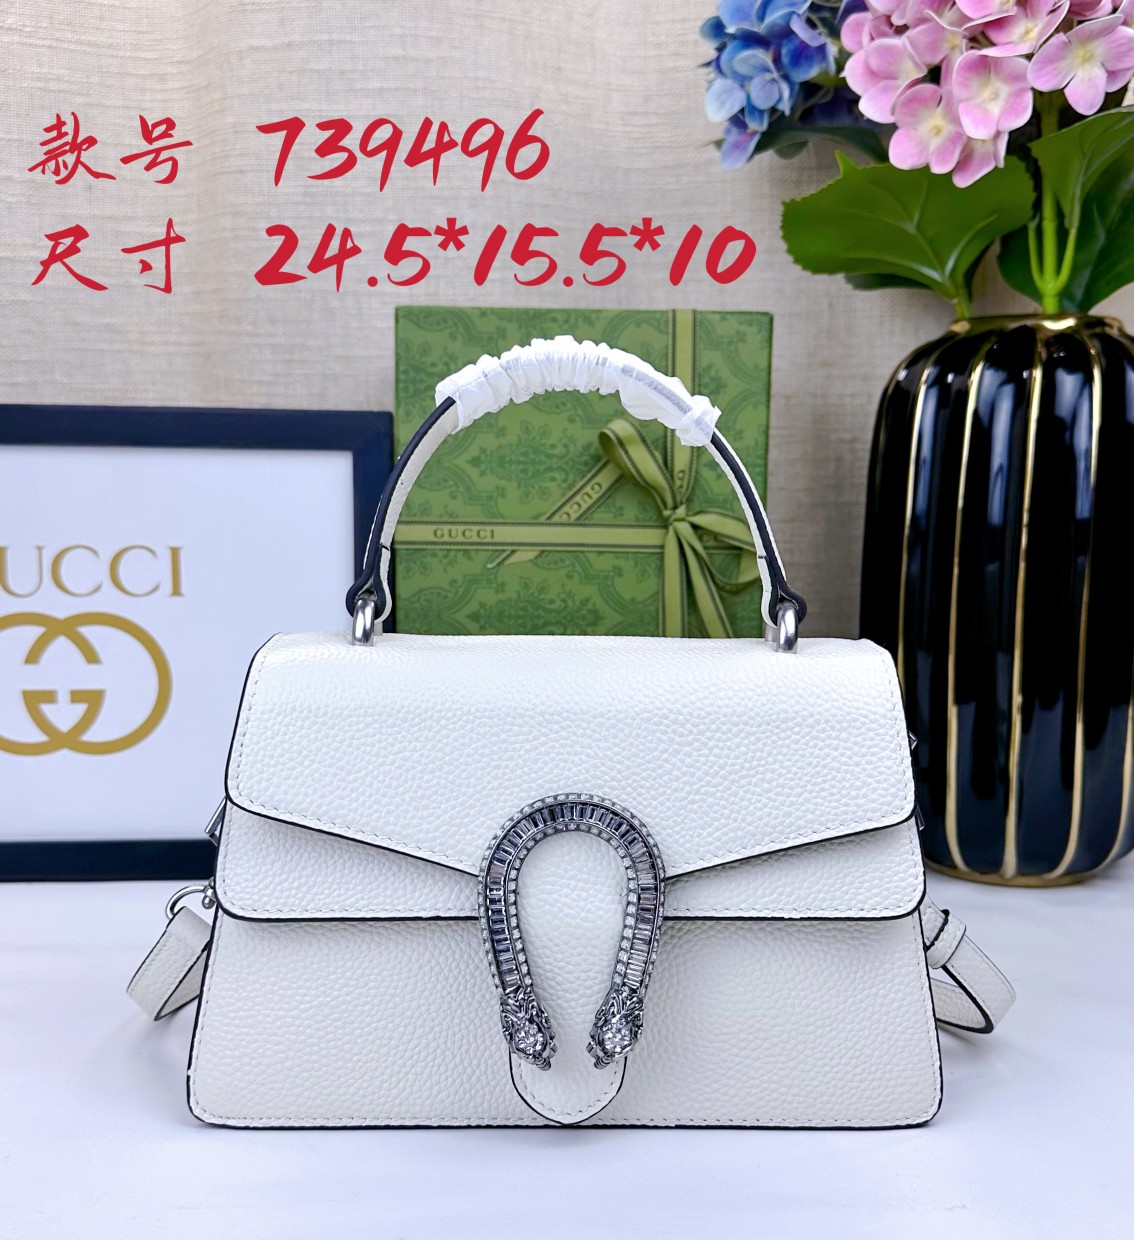 Gucci Dionysus Bags Handbags White Cotton Fall Collection